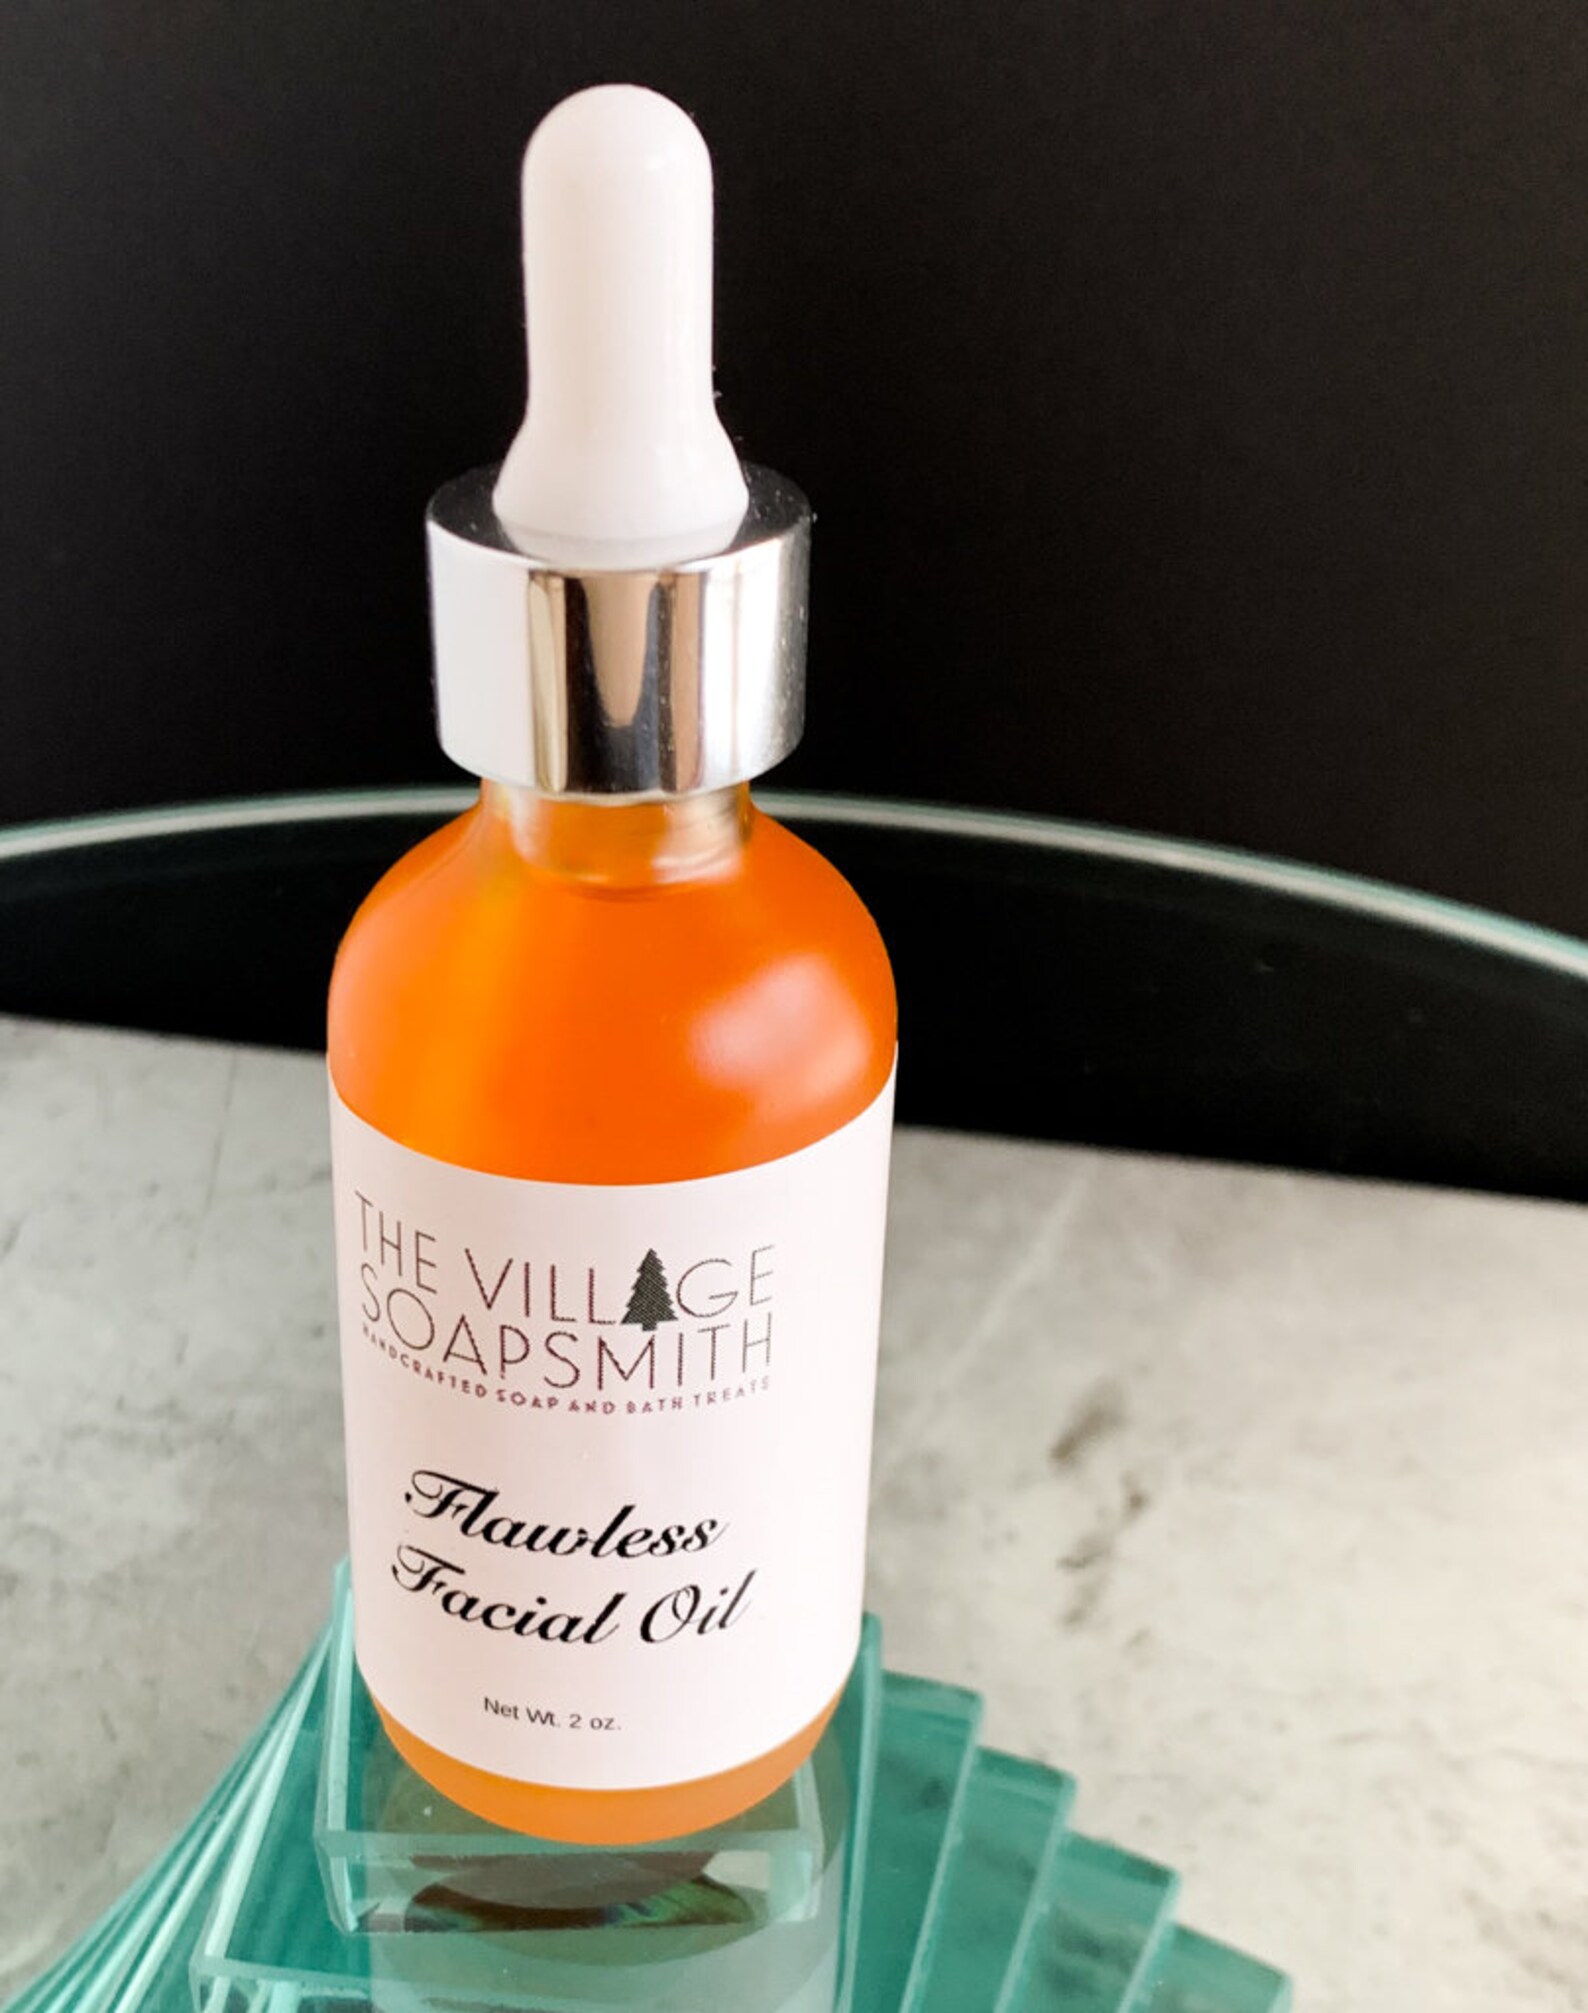 Flawless Facial Oil - Etsy